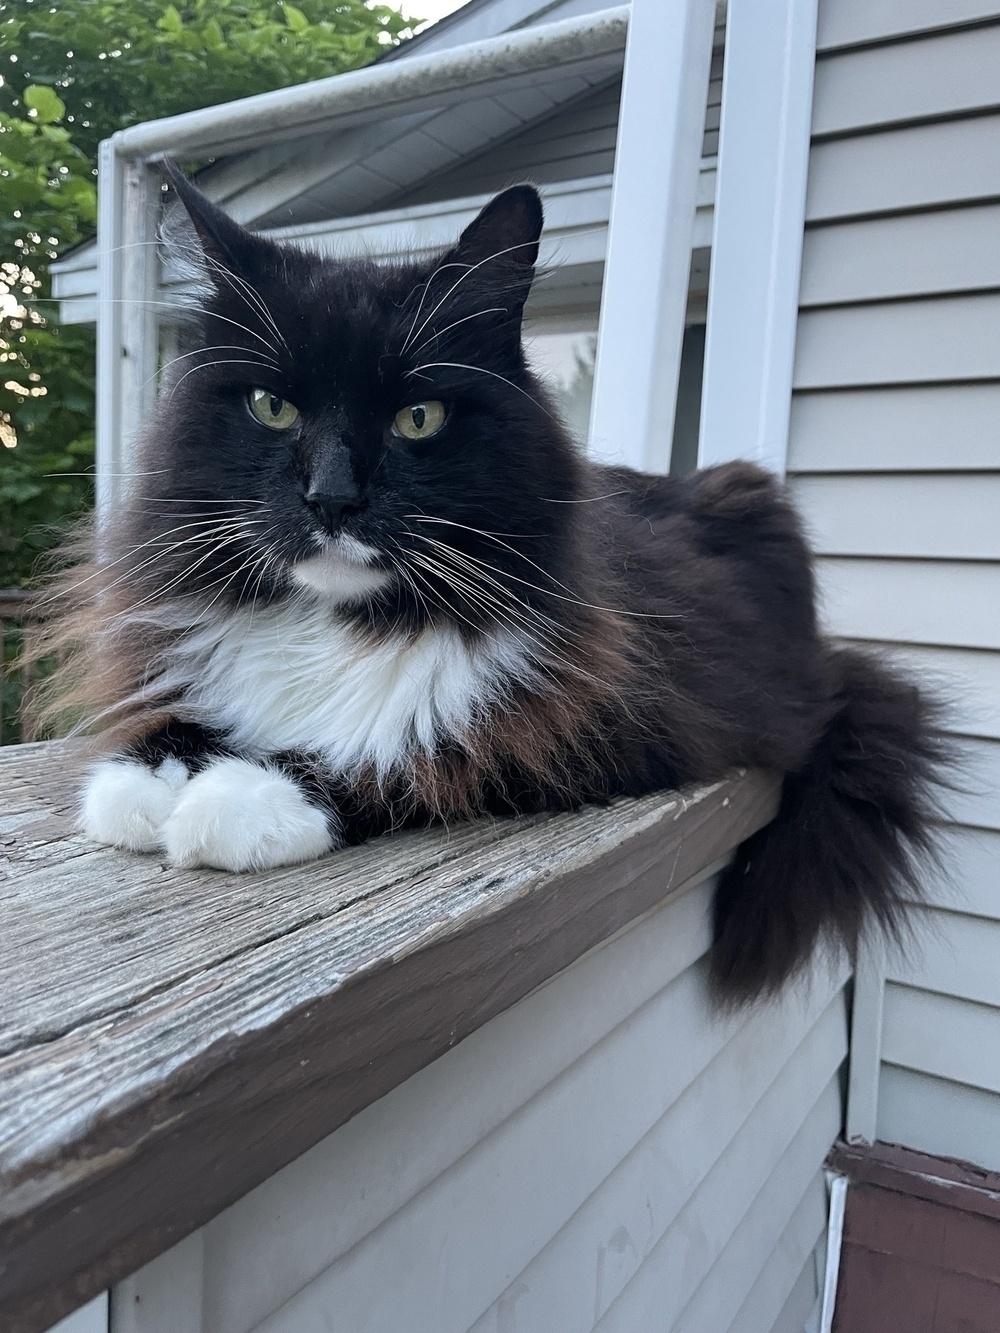 A black and white cat sitting on a railing 